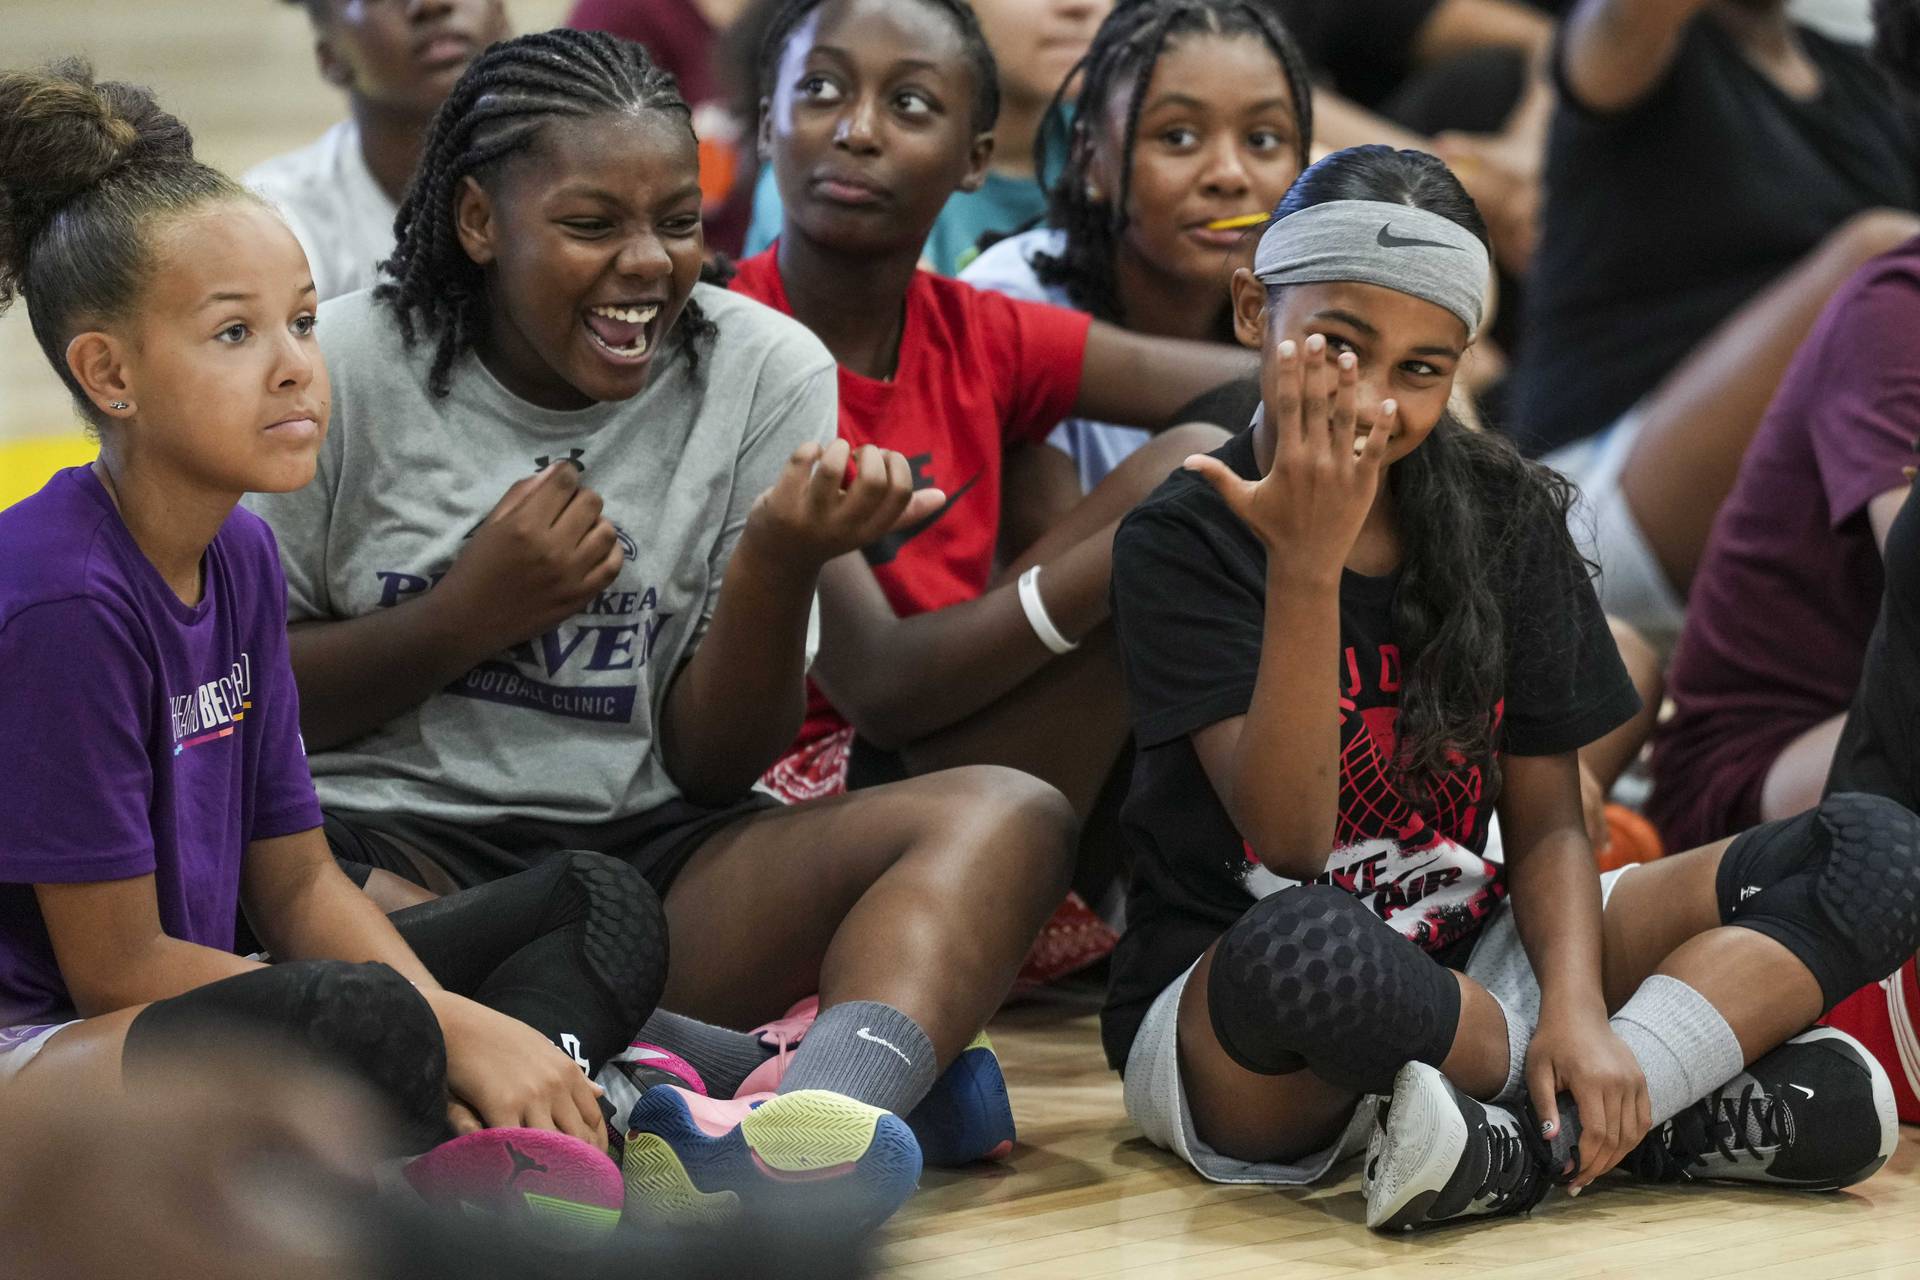 LSU basketball star and Baltimore native Angel Reese hosted a basketball clinic at Saint Frances Academy on July 19, 2023. Attendees scream, cheer and clap for Reese as she enters the court.